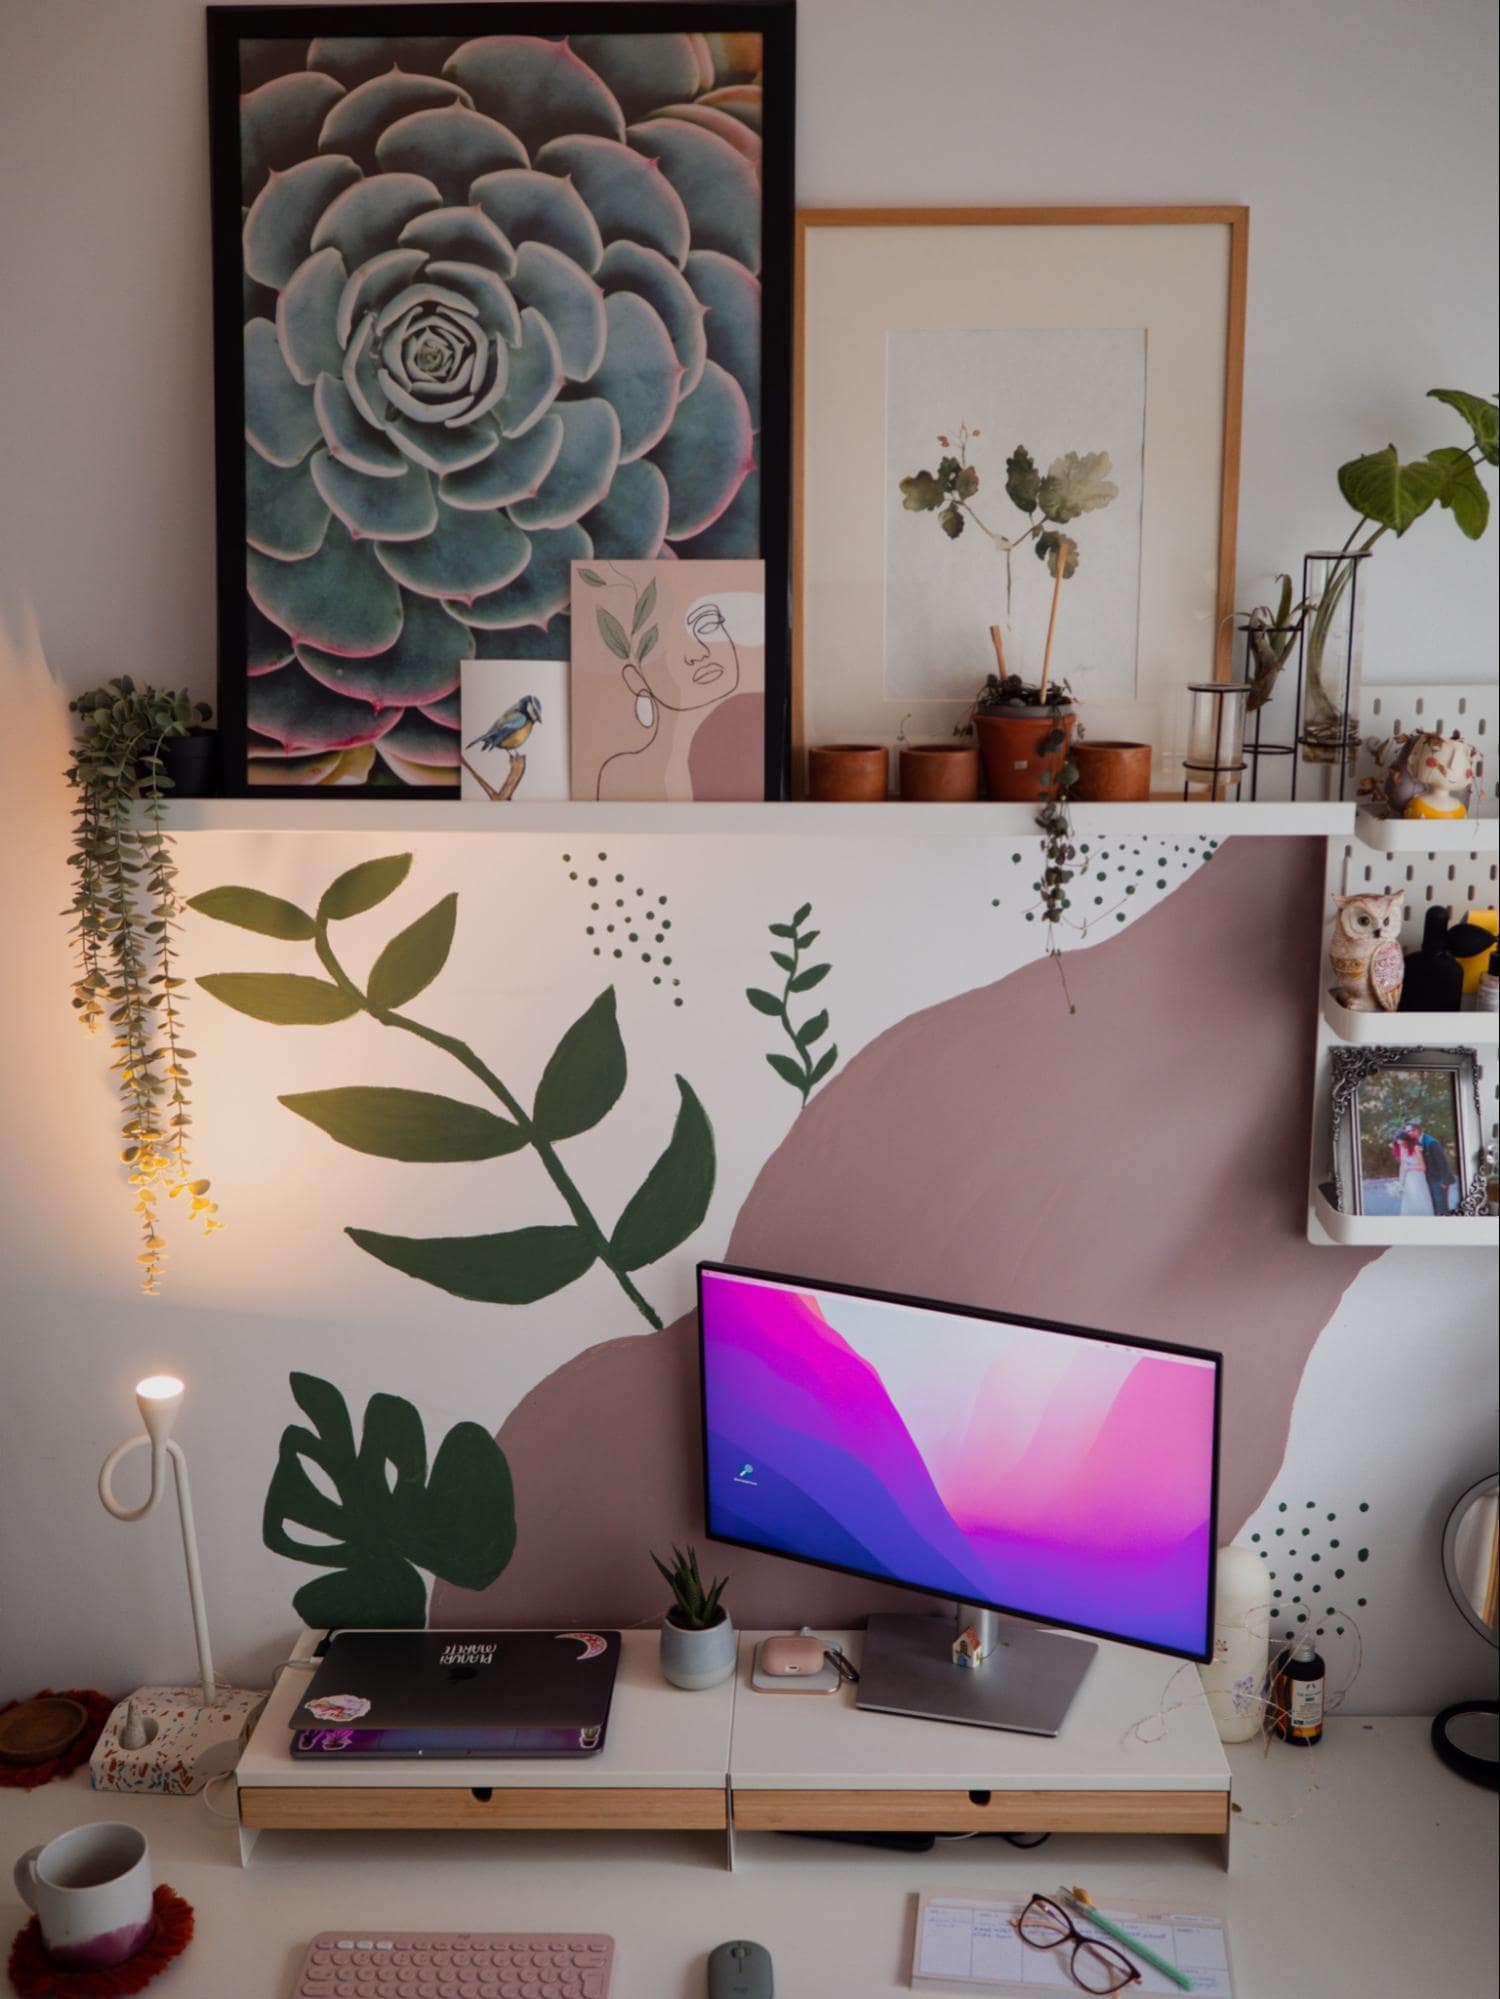 A well-organised desk setup featuring a soft, pastel colour palette with green accents